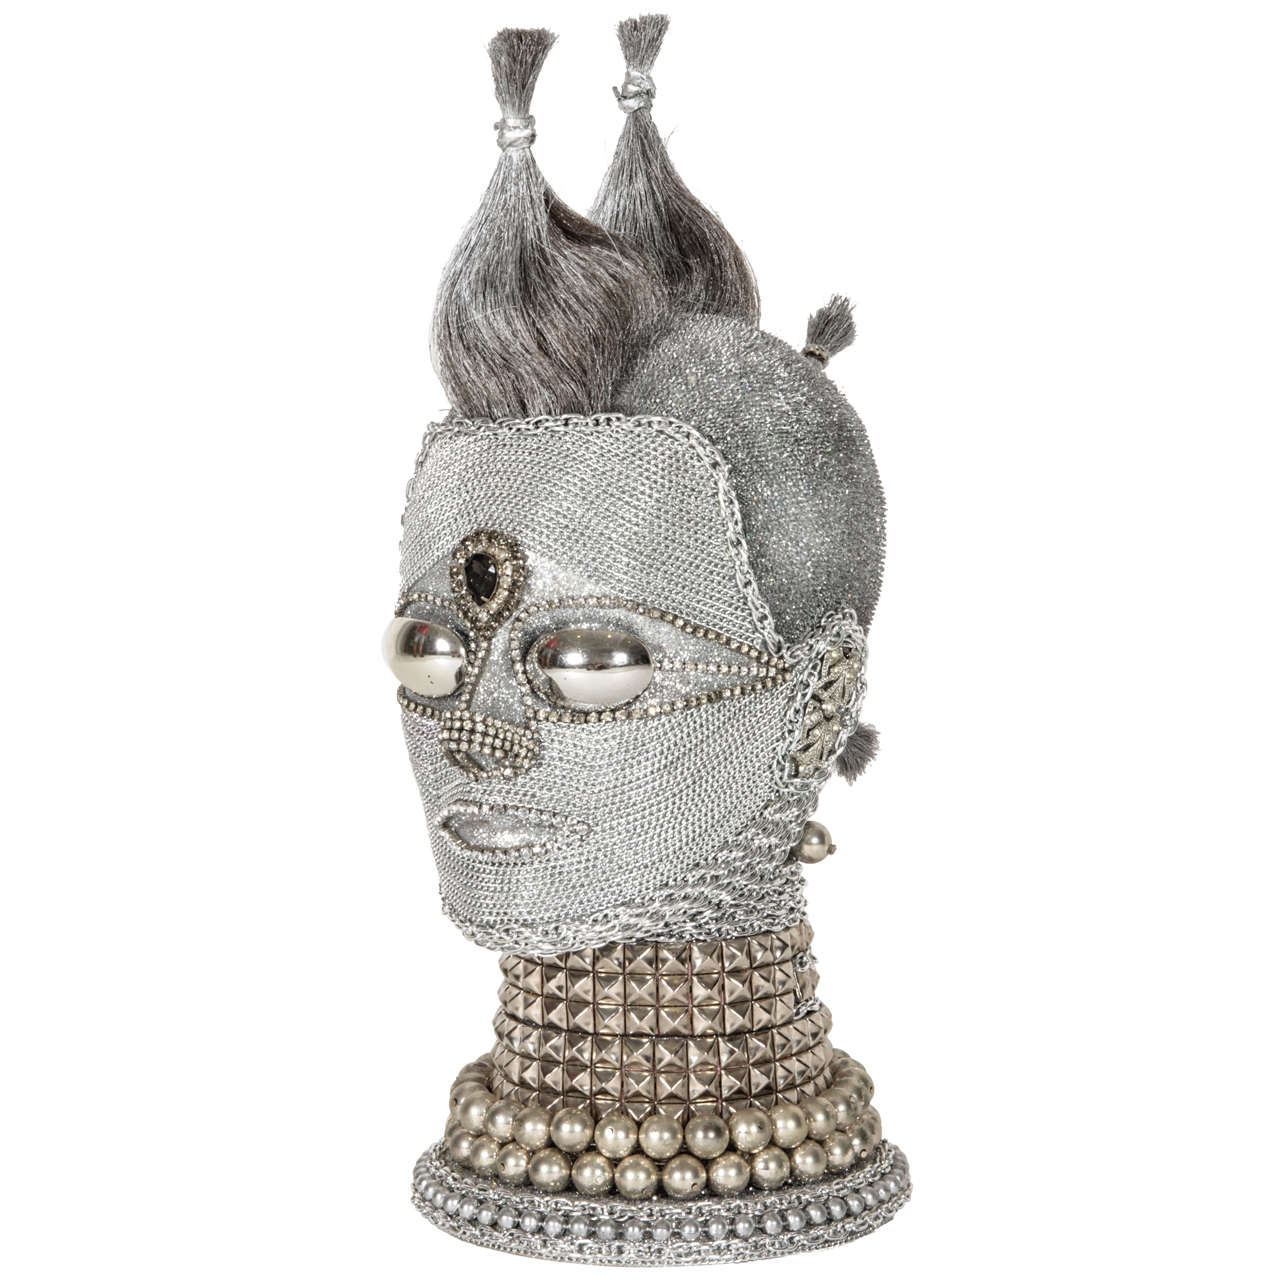 "Punk Rock" Android Bust by W. Beaupre